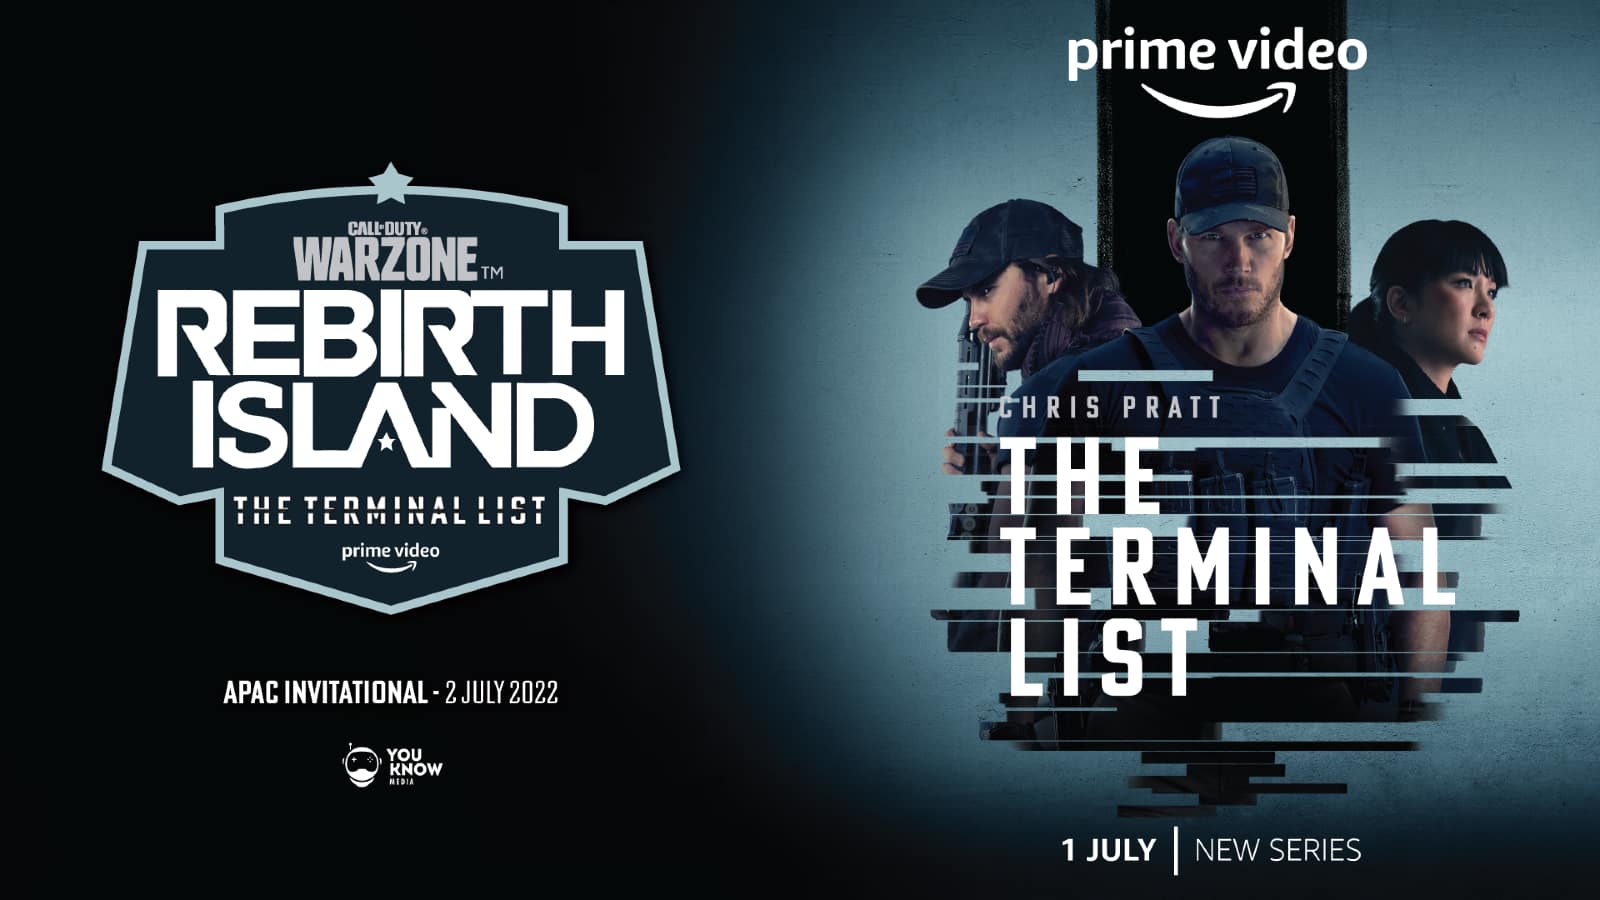 Warzone Rebirth Island tournament sponsored by The Terminal List on Amazon Prime Video